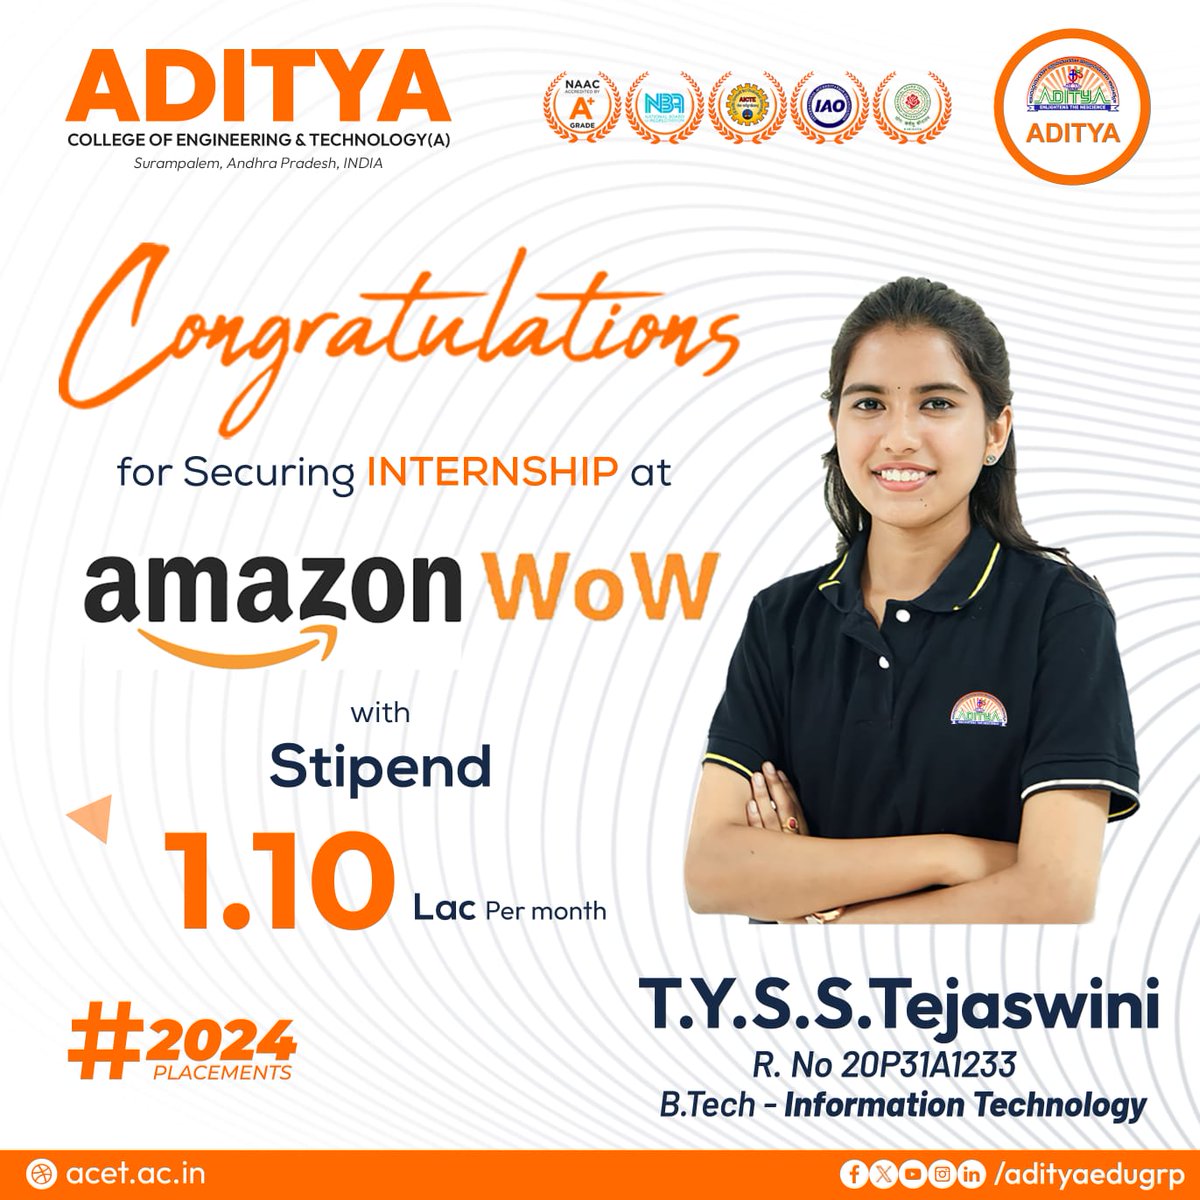 We're thrilled to announce that our fellow, T Tejaswini, has secured an internship at Amazon Wow 🚀 with a stipend of 1.10 Lac per month! 🌟 Congratulations, Tejaswini, for this remarkable achievement. #Aditya #AmazonWow #AmazonInternship #SuccessStory #AchieveWithAditya